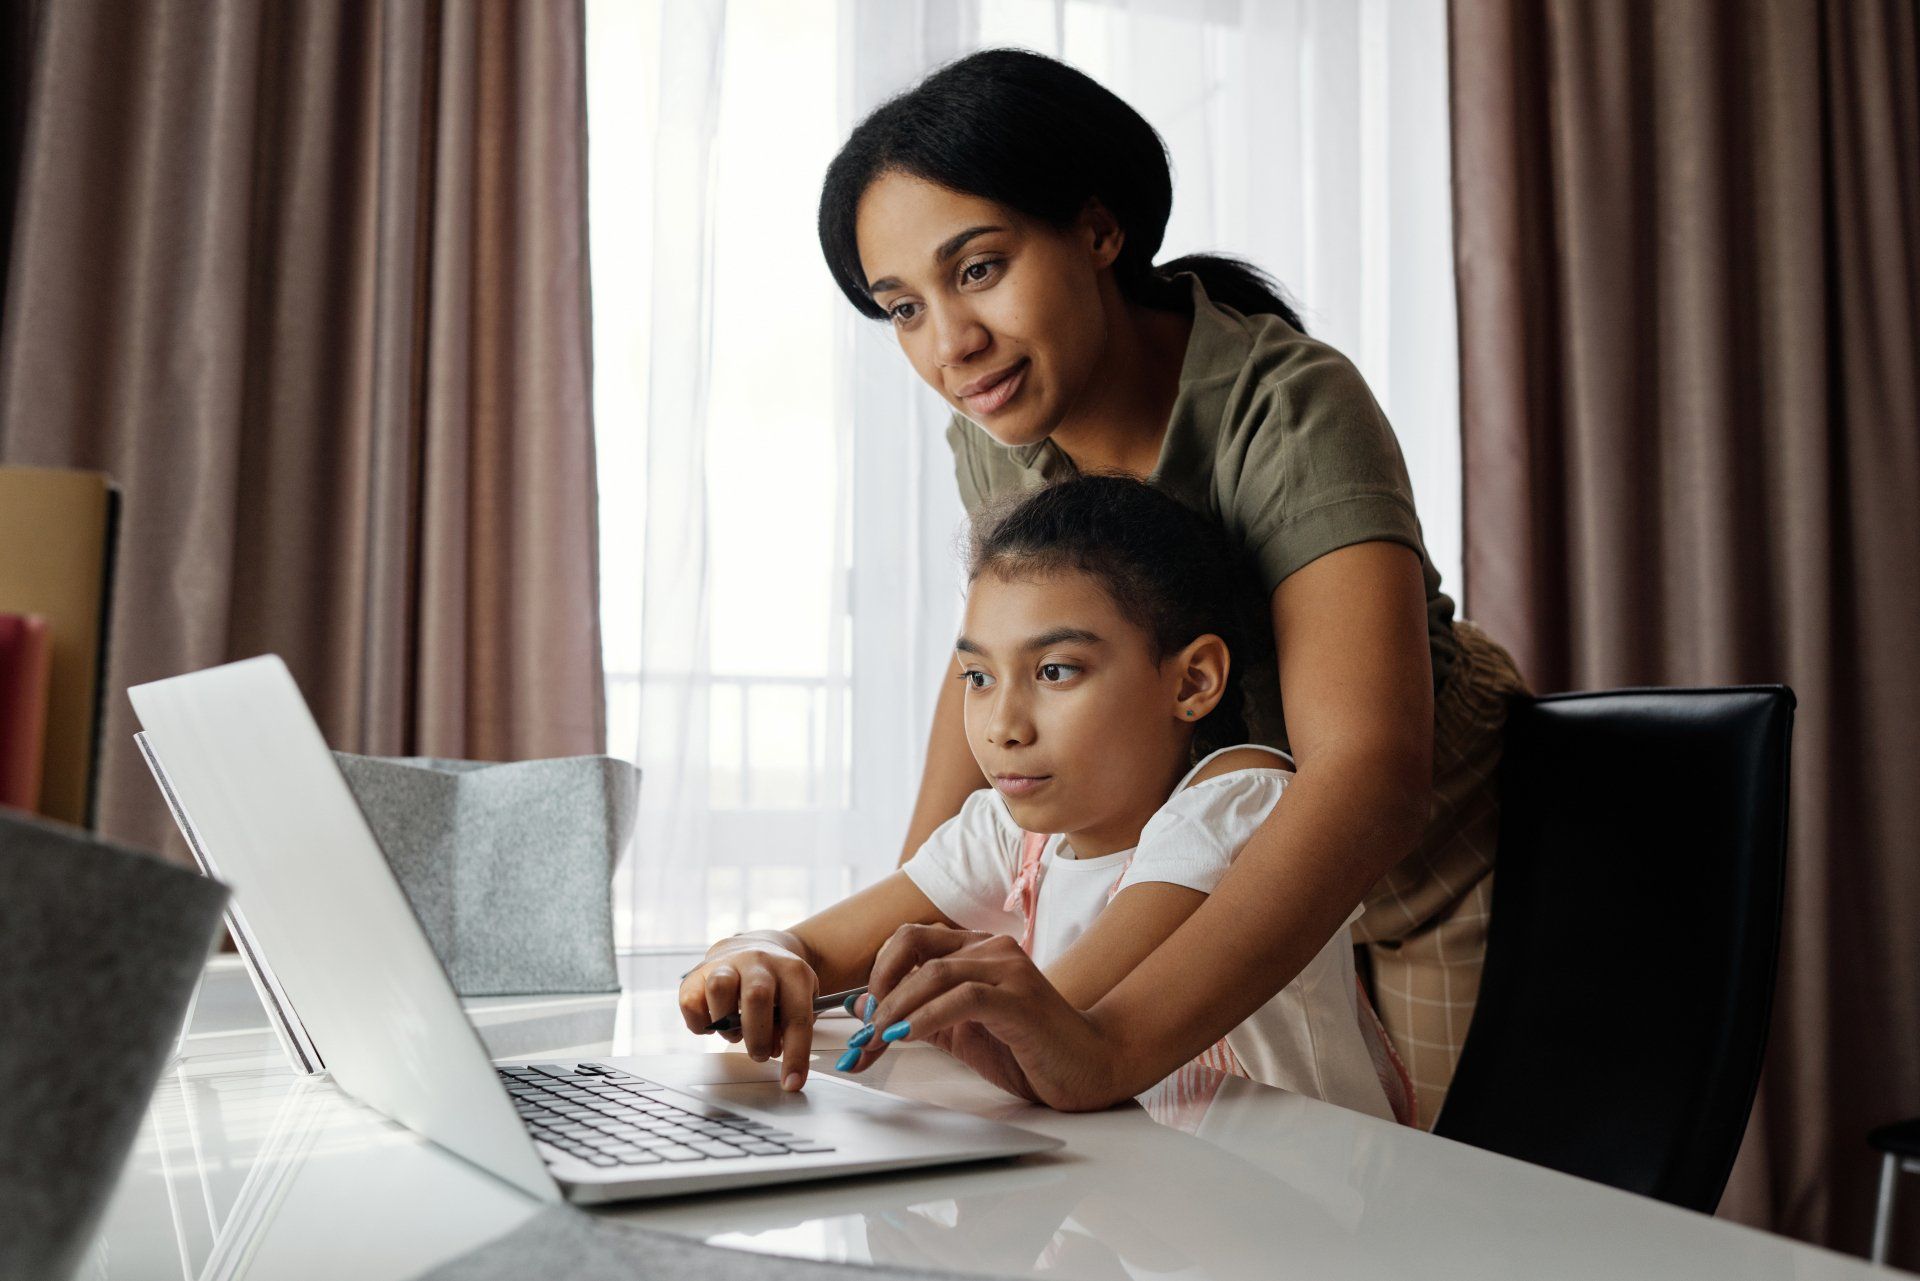 A woman and child looking at a computer screen